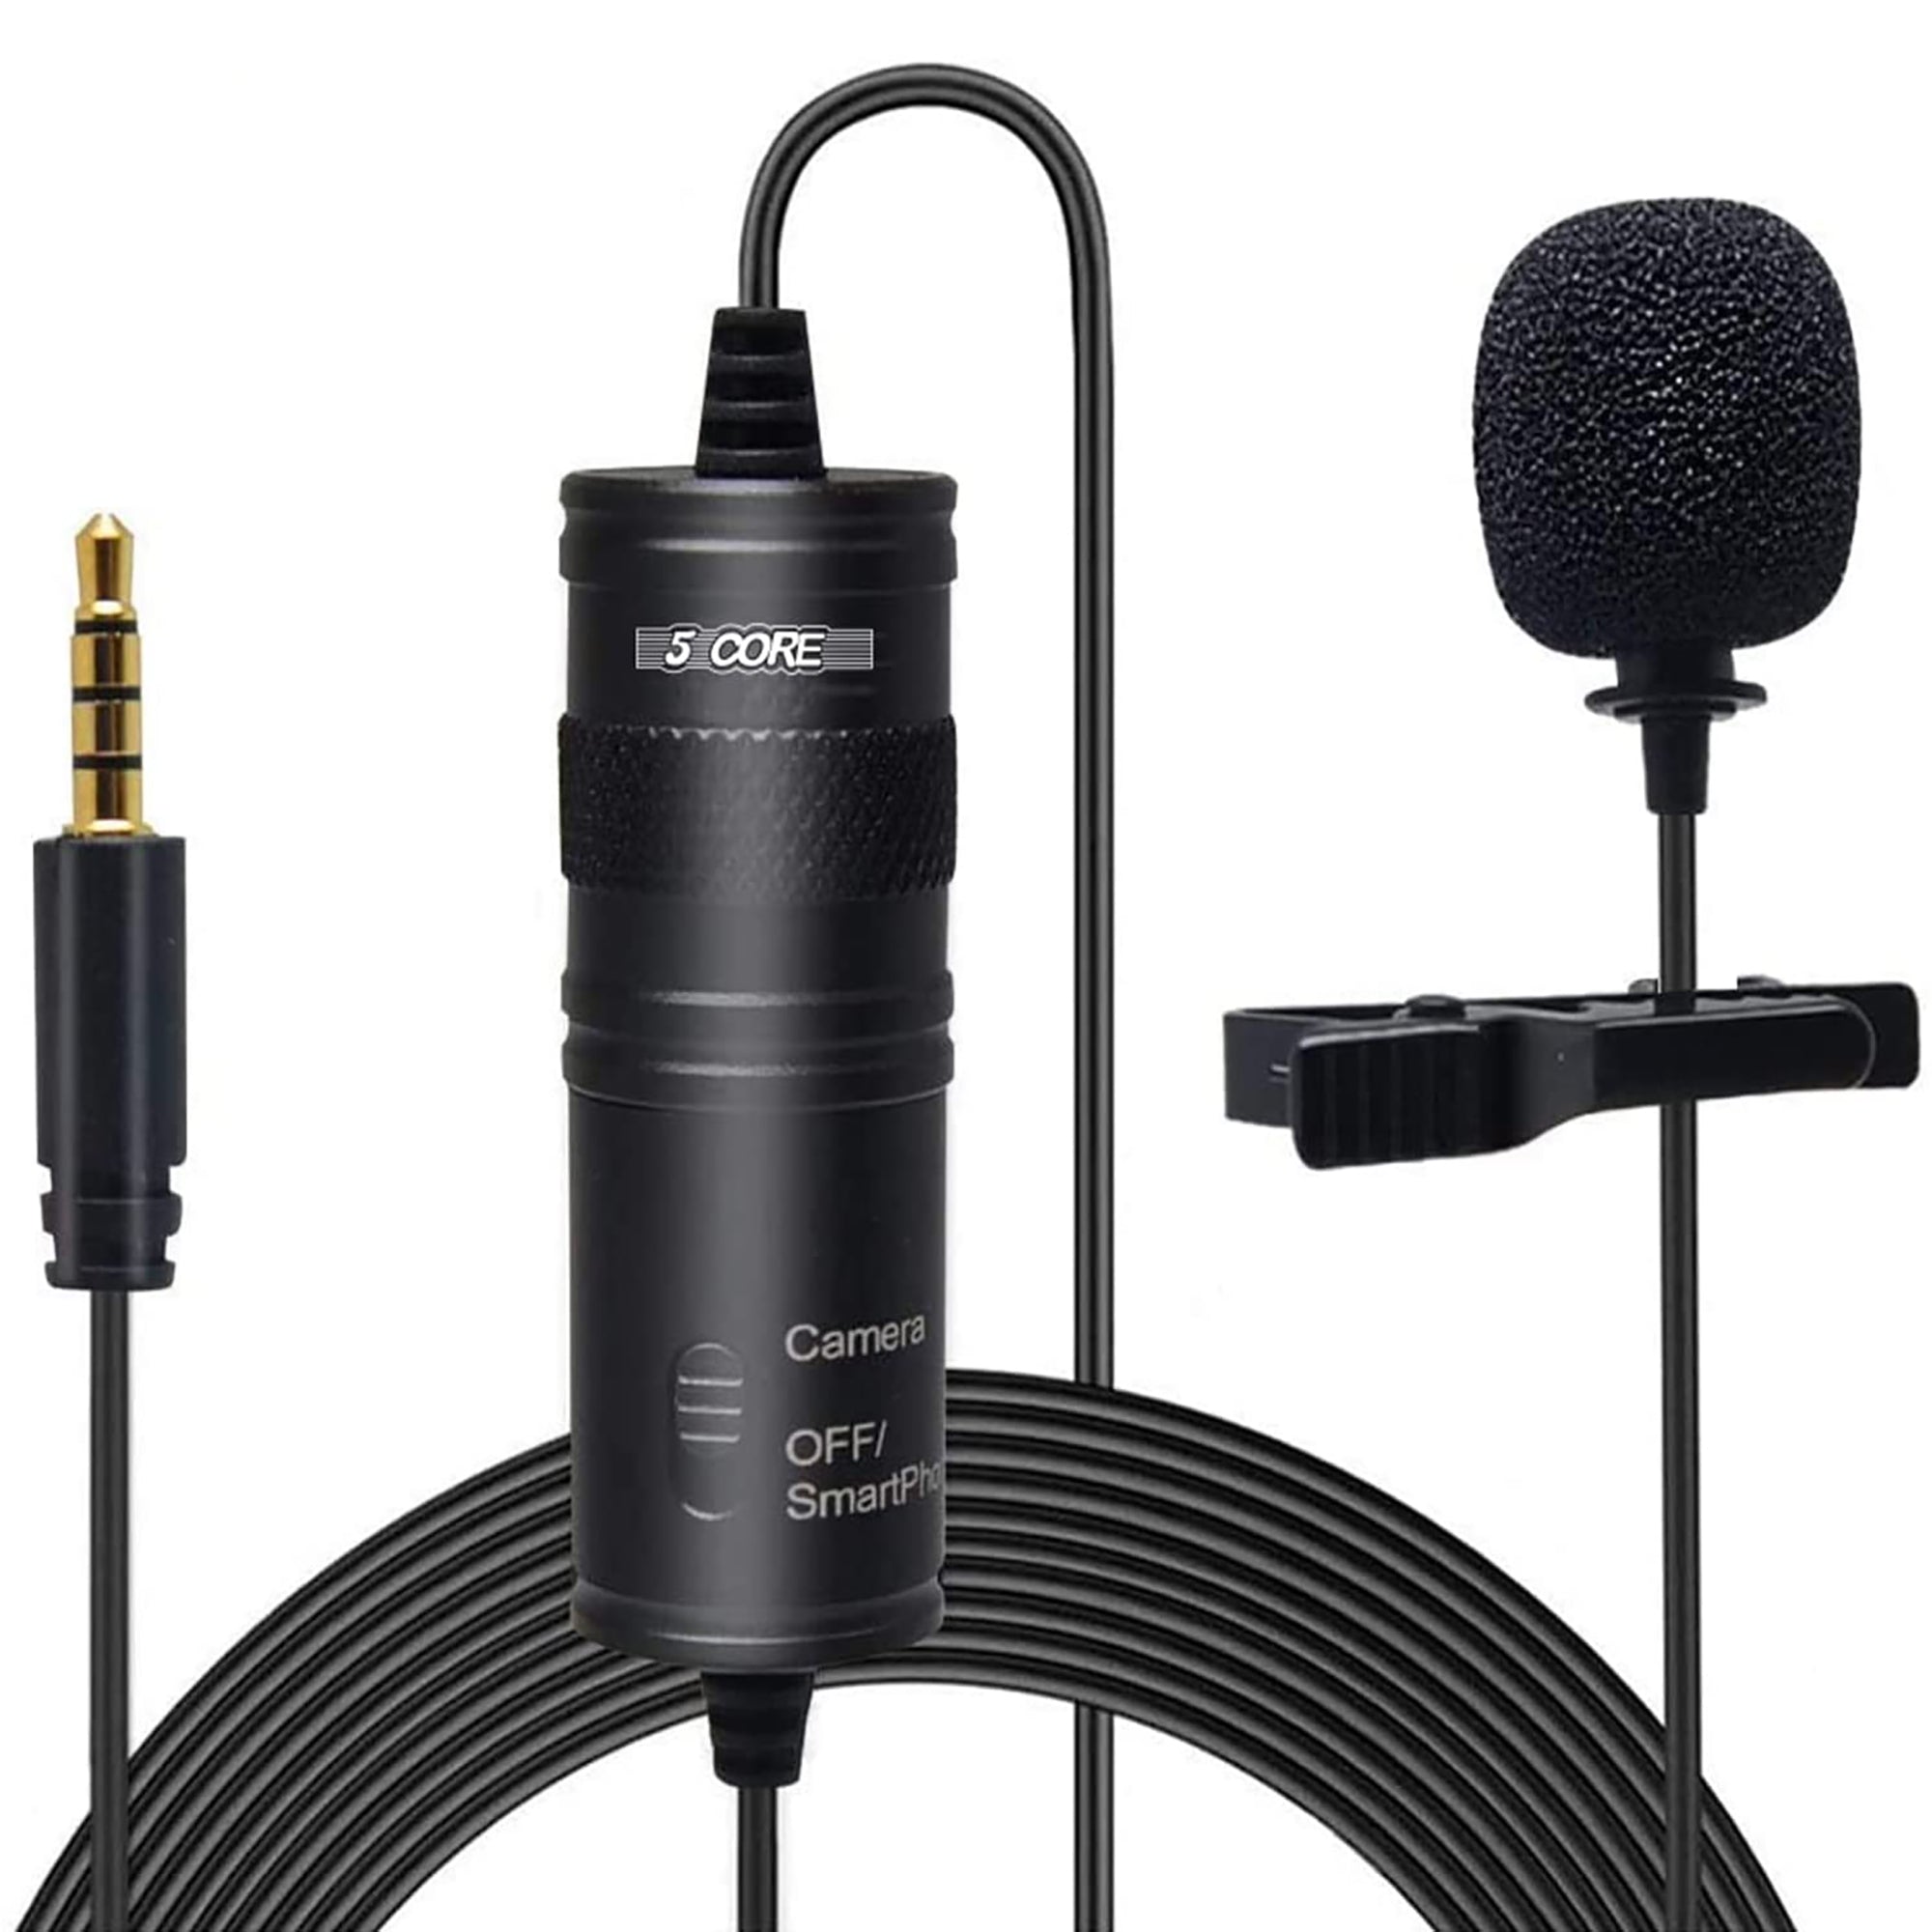 5 Core Professional Grade Lavalier Clip On Microphone| Premium Lav Mic for Camera, Phone, GoPro Video Recording | Compact Noise Cancelling 3.5mm Tiny Shirt Mic with Easy Clip and Windscreen- CM 001